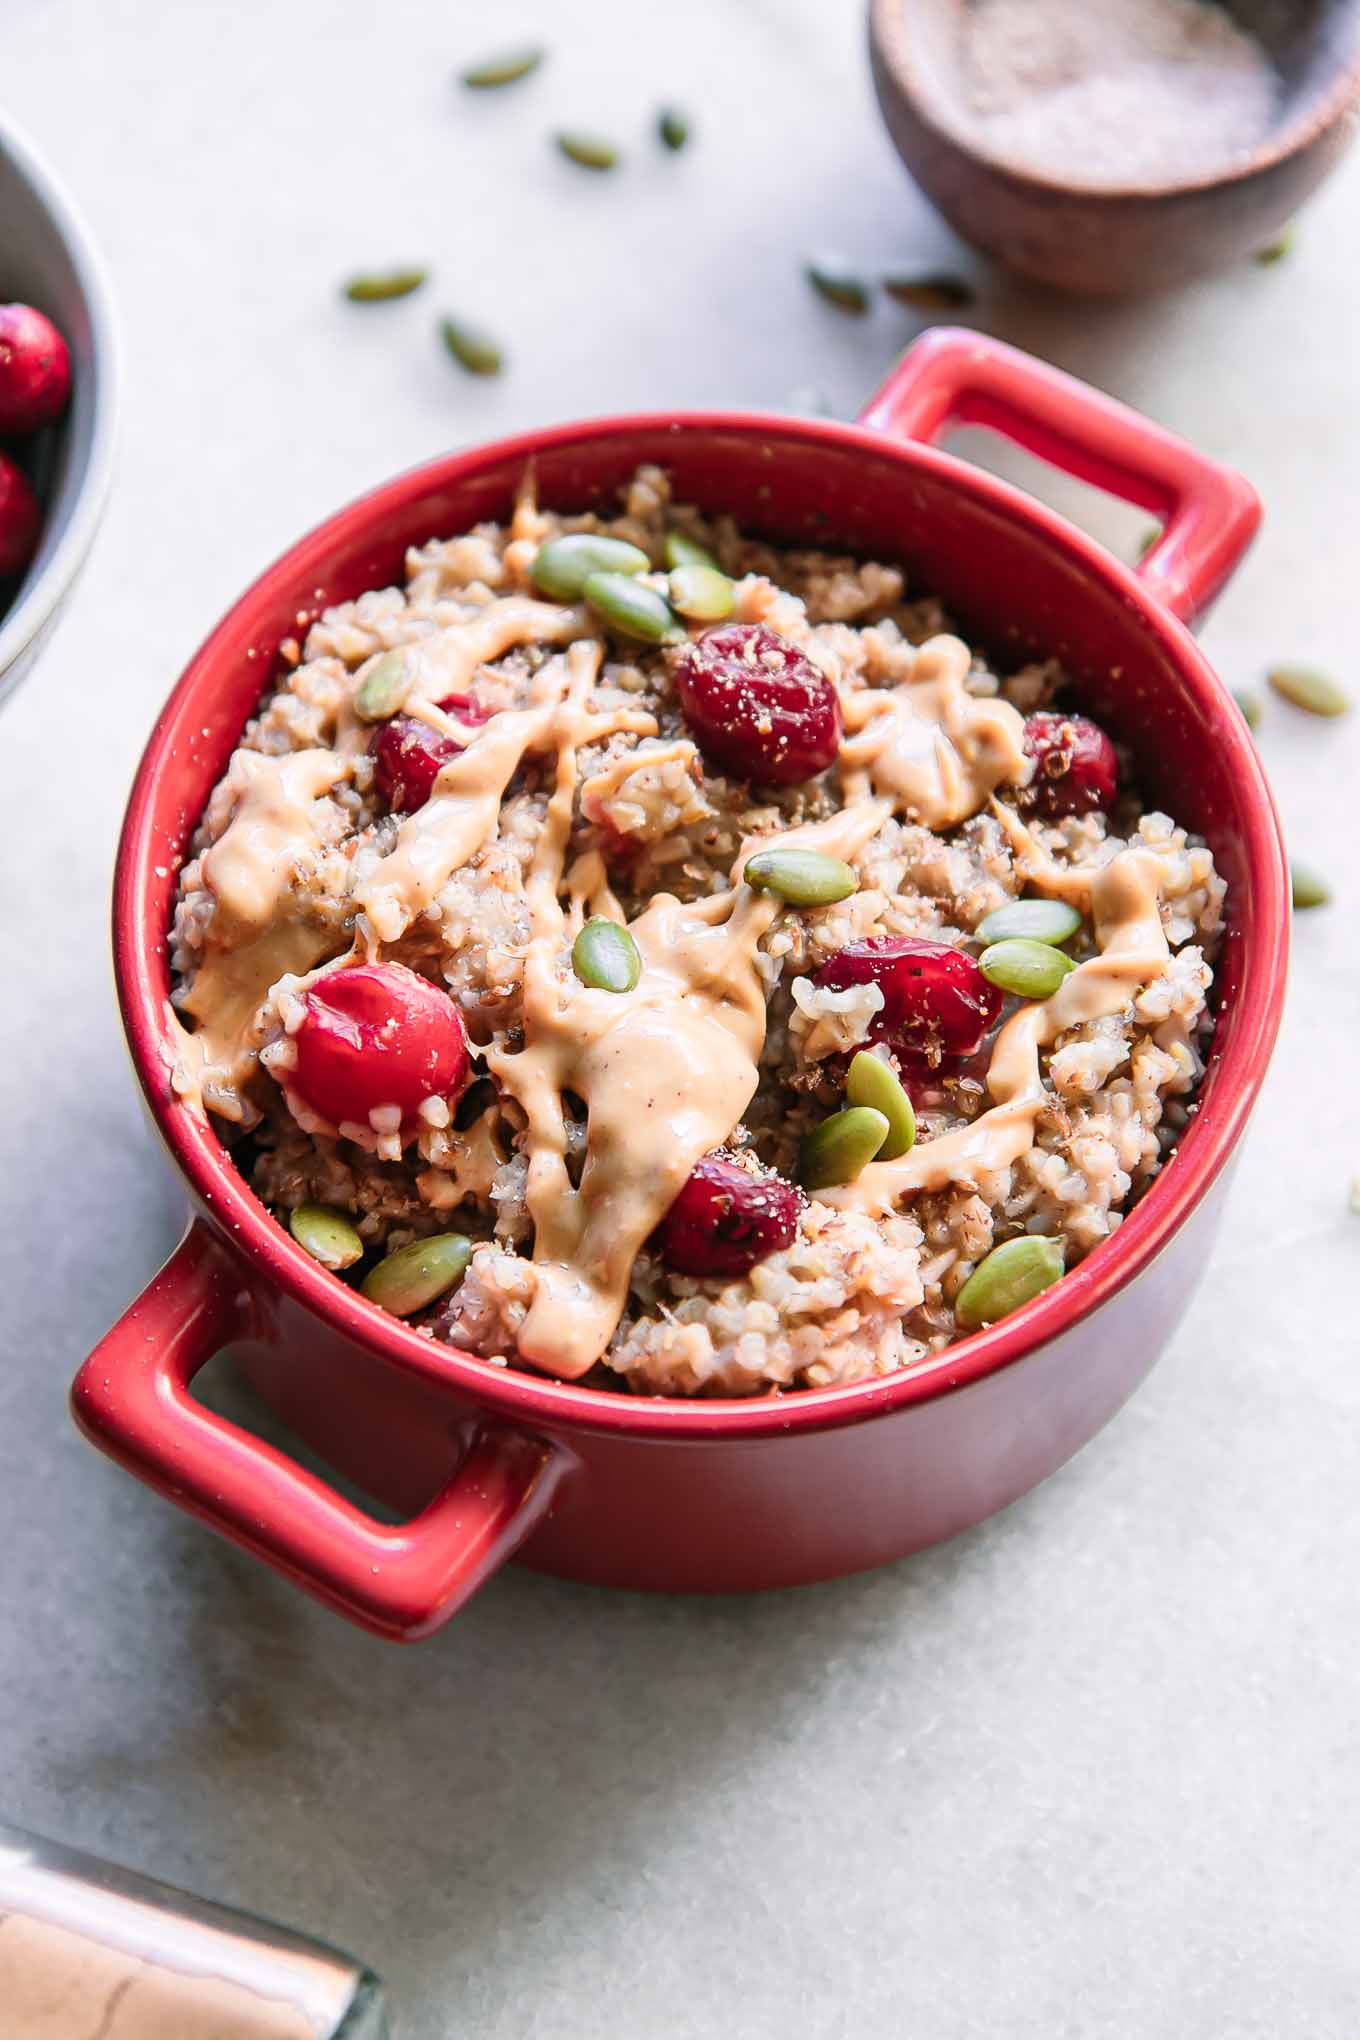 a red bowl with cranberry oatmeal and peanut butter drizzled on top